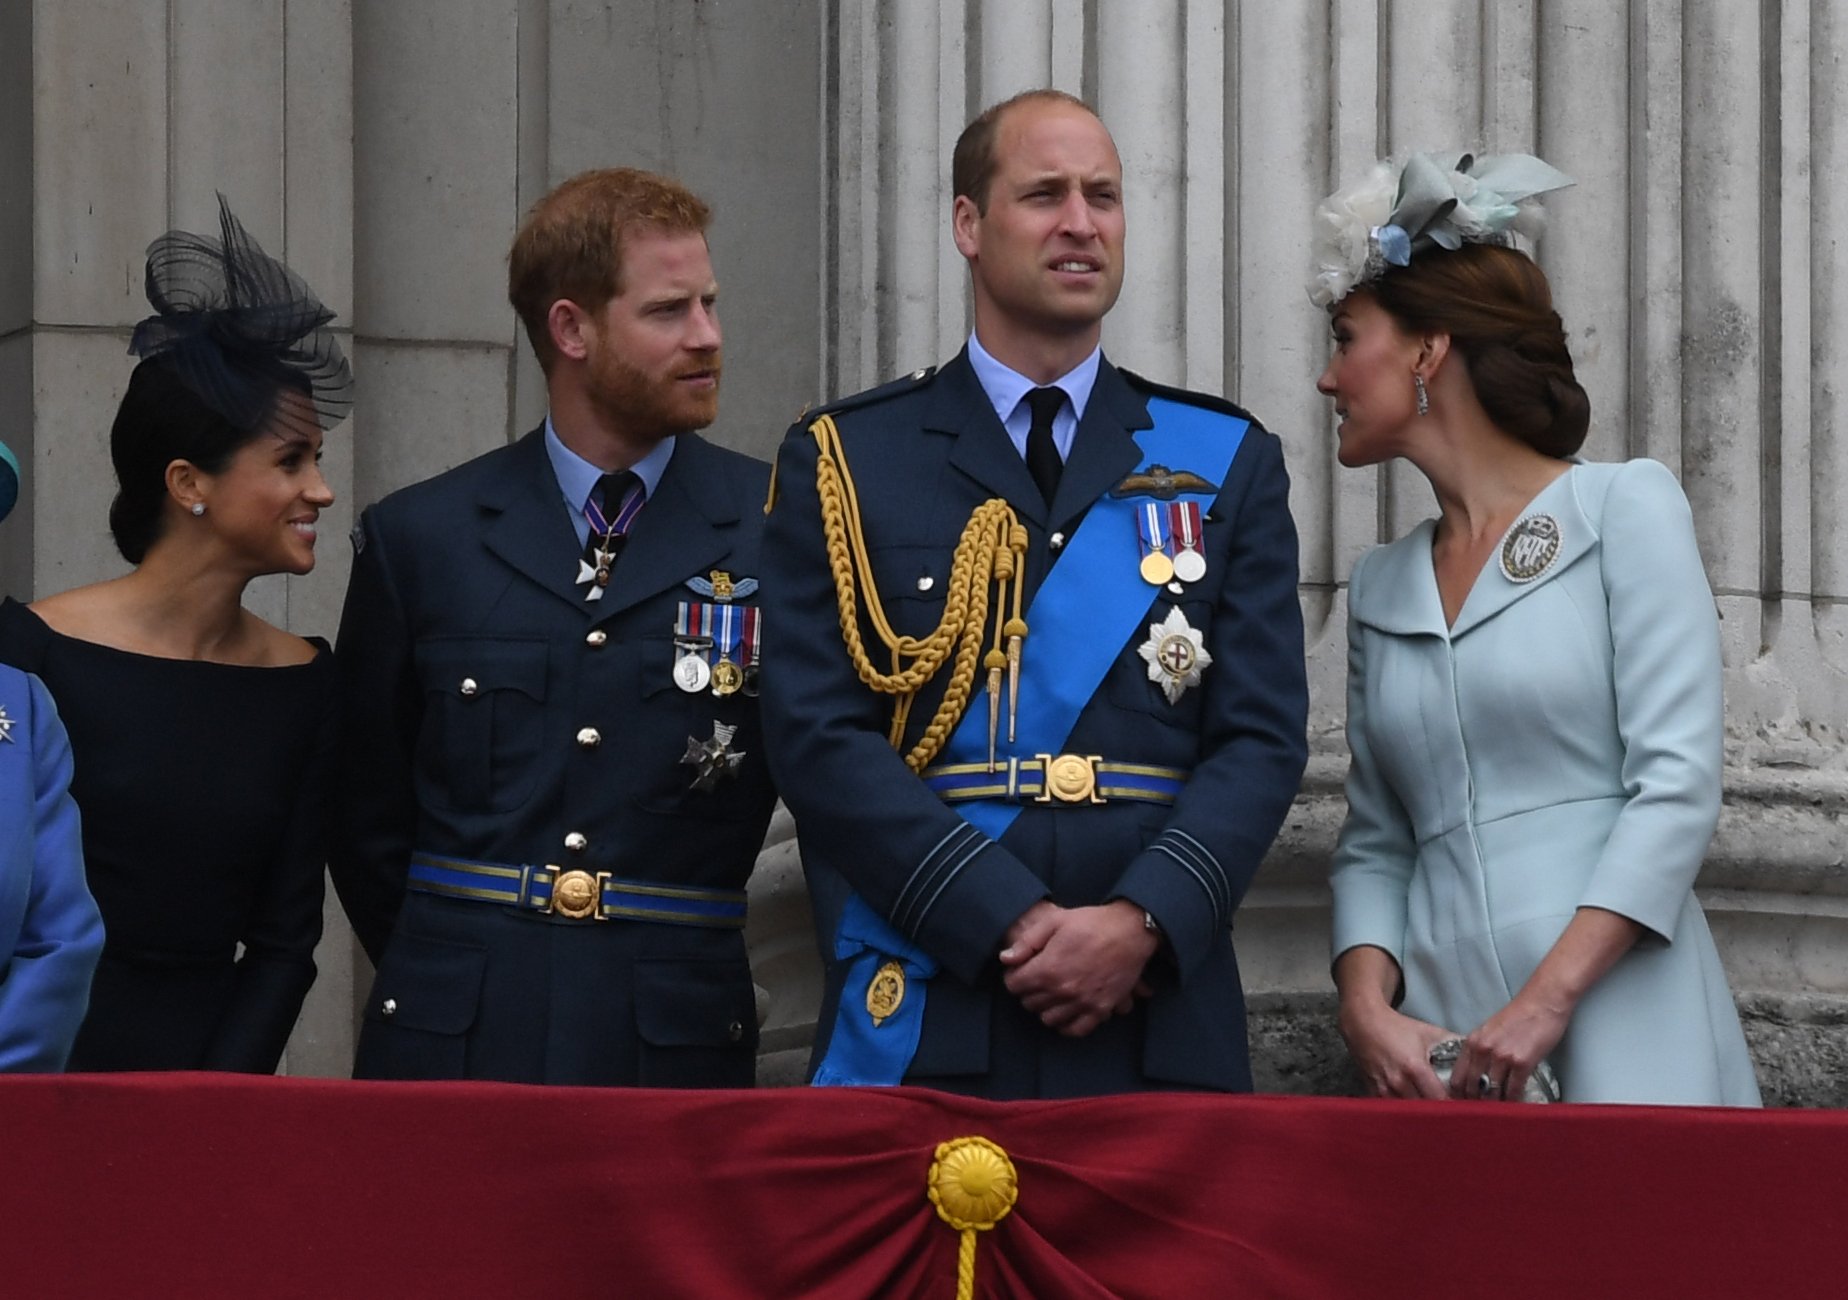 Meghan Markle, Prince Harry, Prince William and Kate Middleton standing on the balcony of Buckingham Palace to view a flypast marking the centenary of the Royal Air Force (RAF) on July 10, 2018 in London, England. / Source: Getty Images